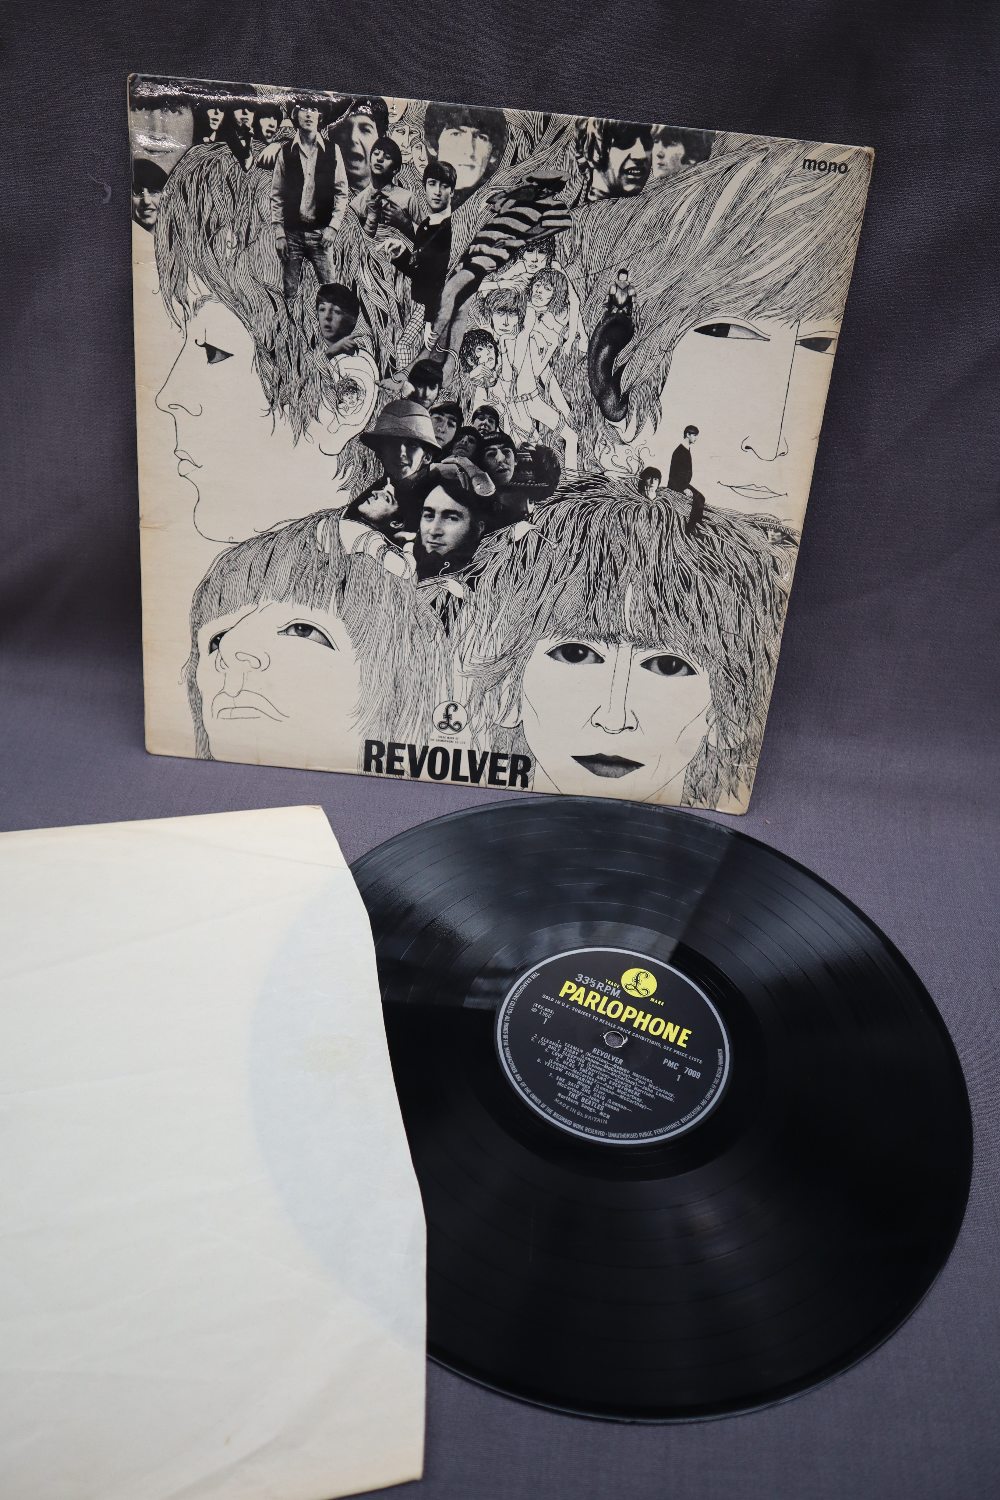 The Beatles white album No 0346775 together with revolver and Sgt Peppers album - Image 9 of 10